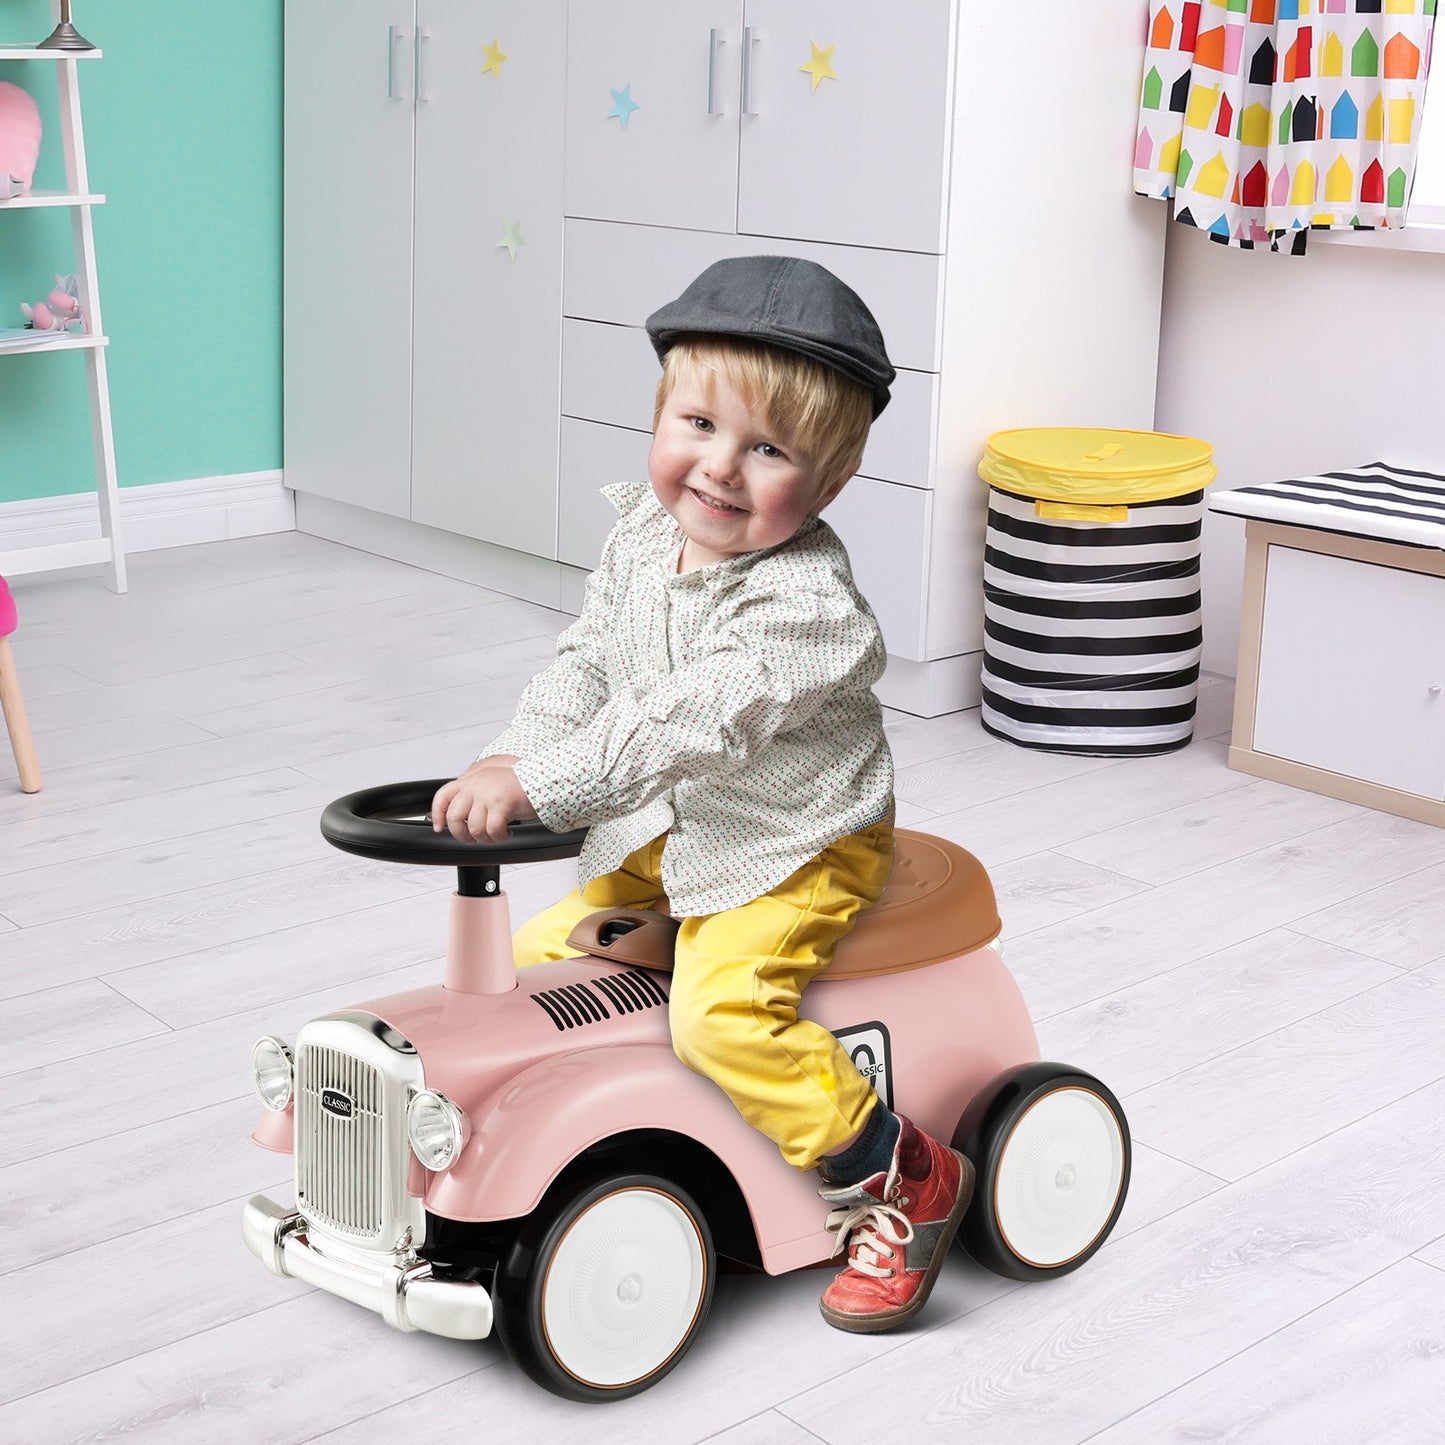 Kids Sit to Stand Vehicle with Working Steering Wheel and Under Seat Storage, Pink